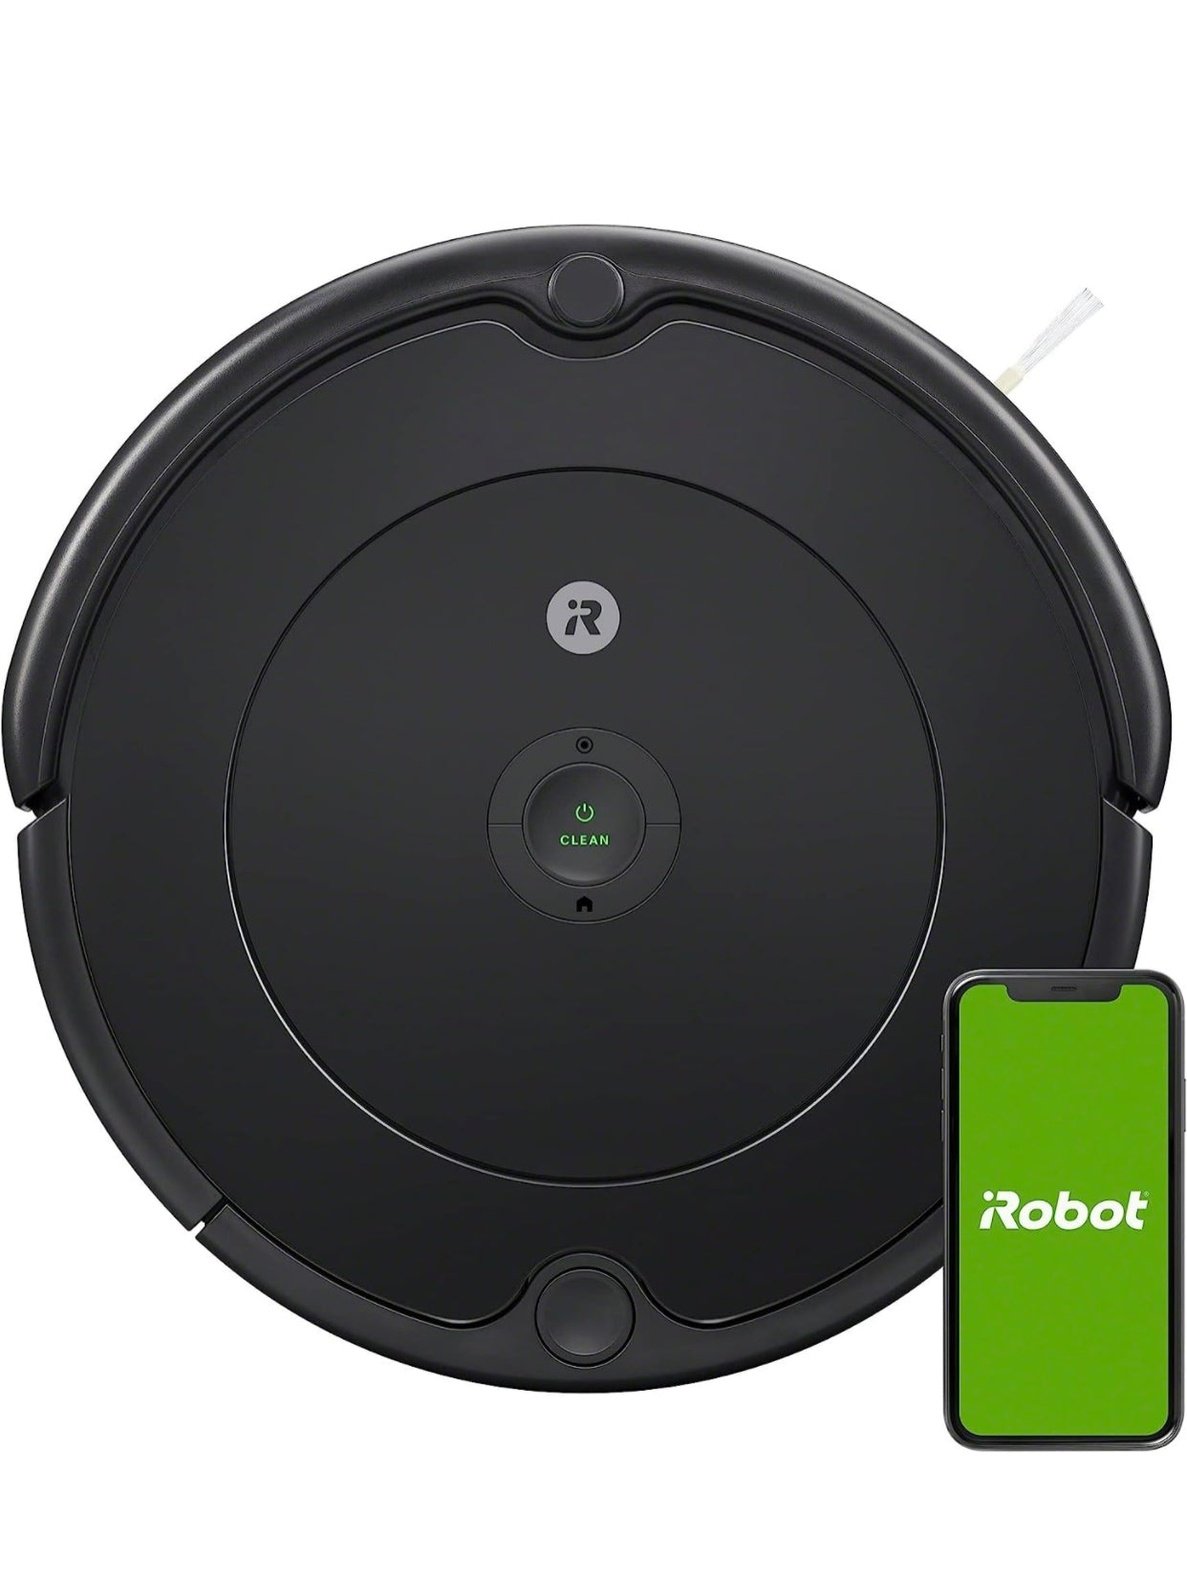 iRobot Roomba 692 Robot Vacuum - Wi-Fi Connectivity, Personalized Cleaning Recommendations, Works with Alexa, Good for Pet Hair, Carpets, Hard Floors, Self-Charging